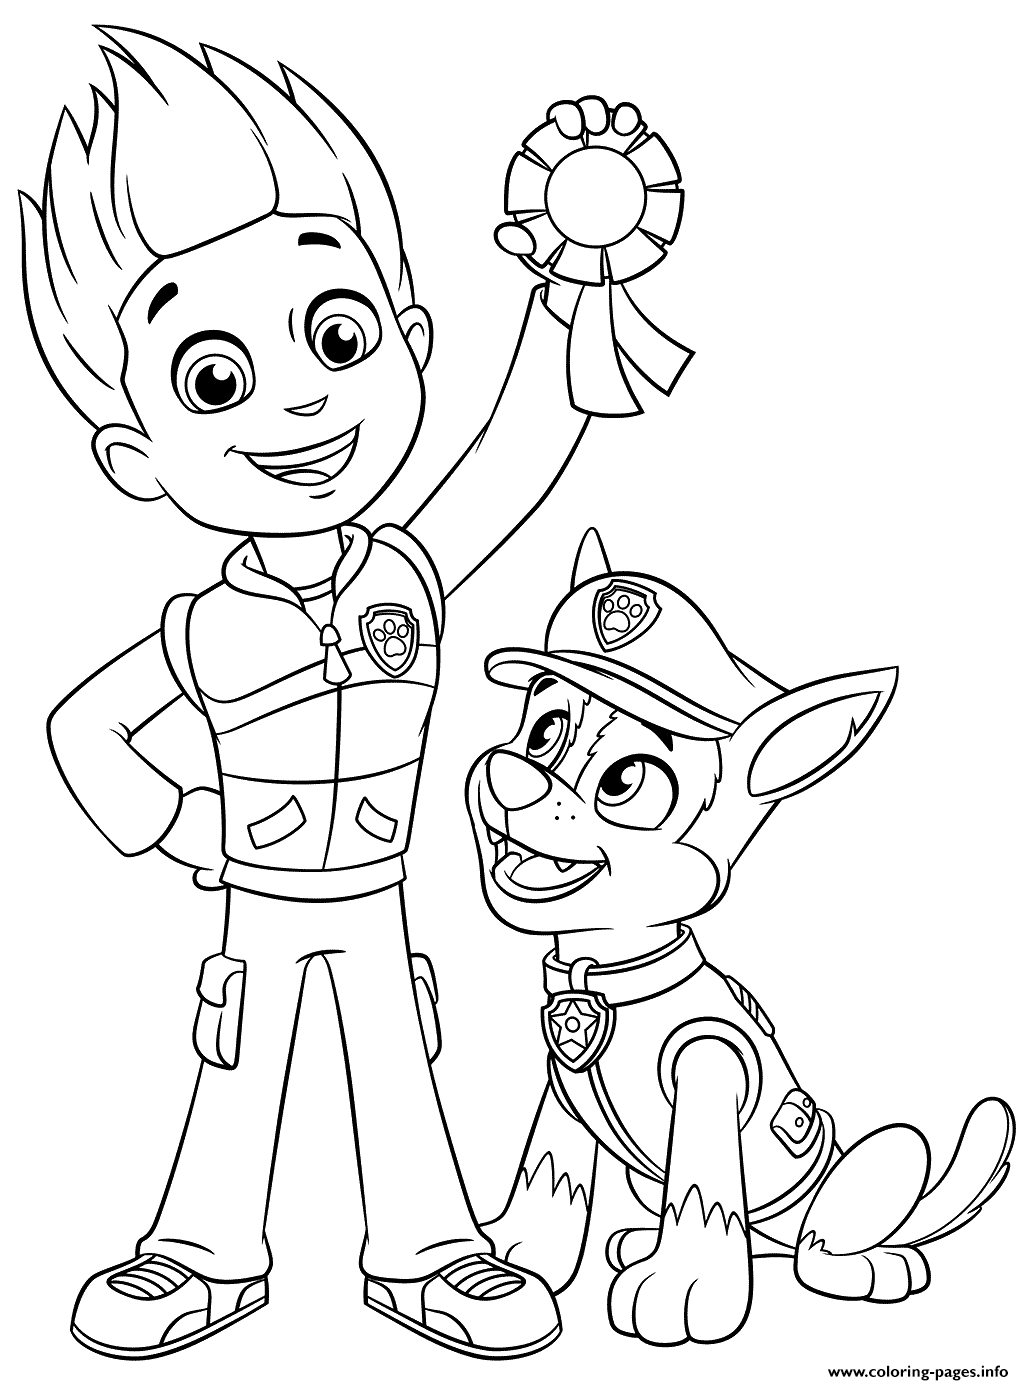 10 Ryder Paw Patrol Coloring Page Paw Patrol Coloring Pages Pdmrea